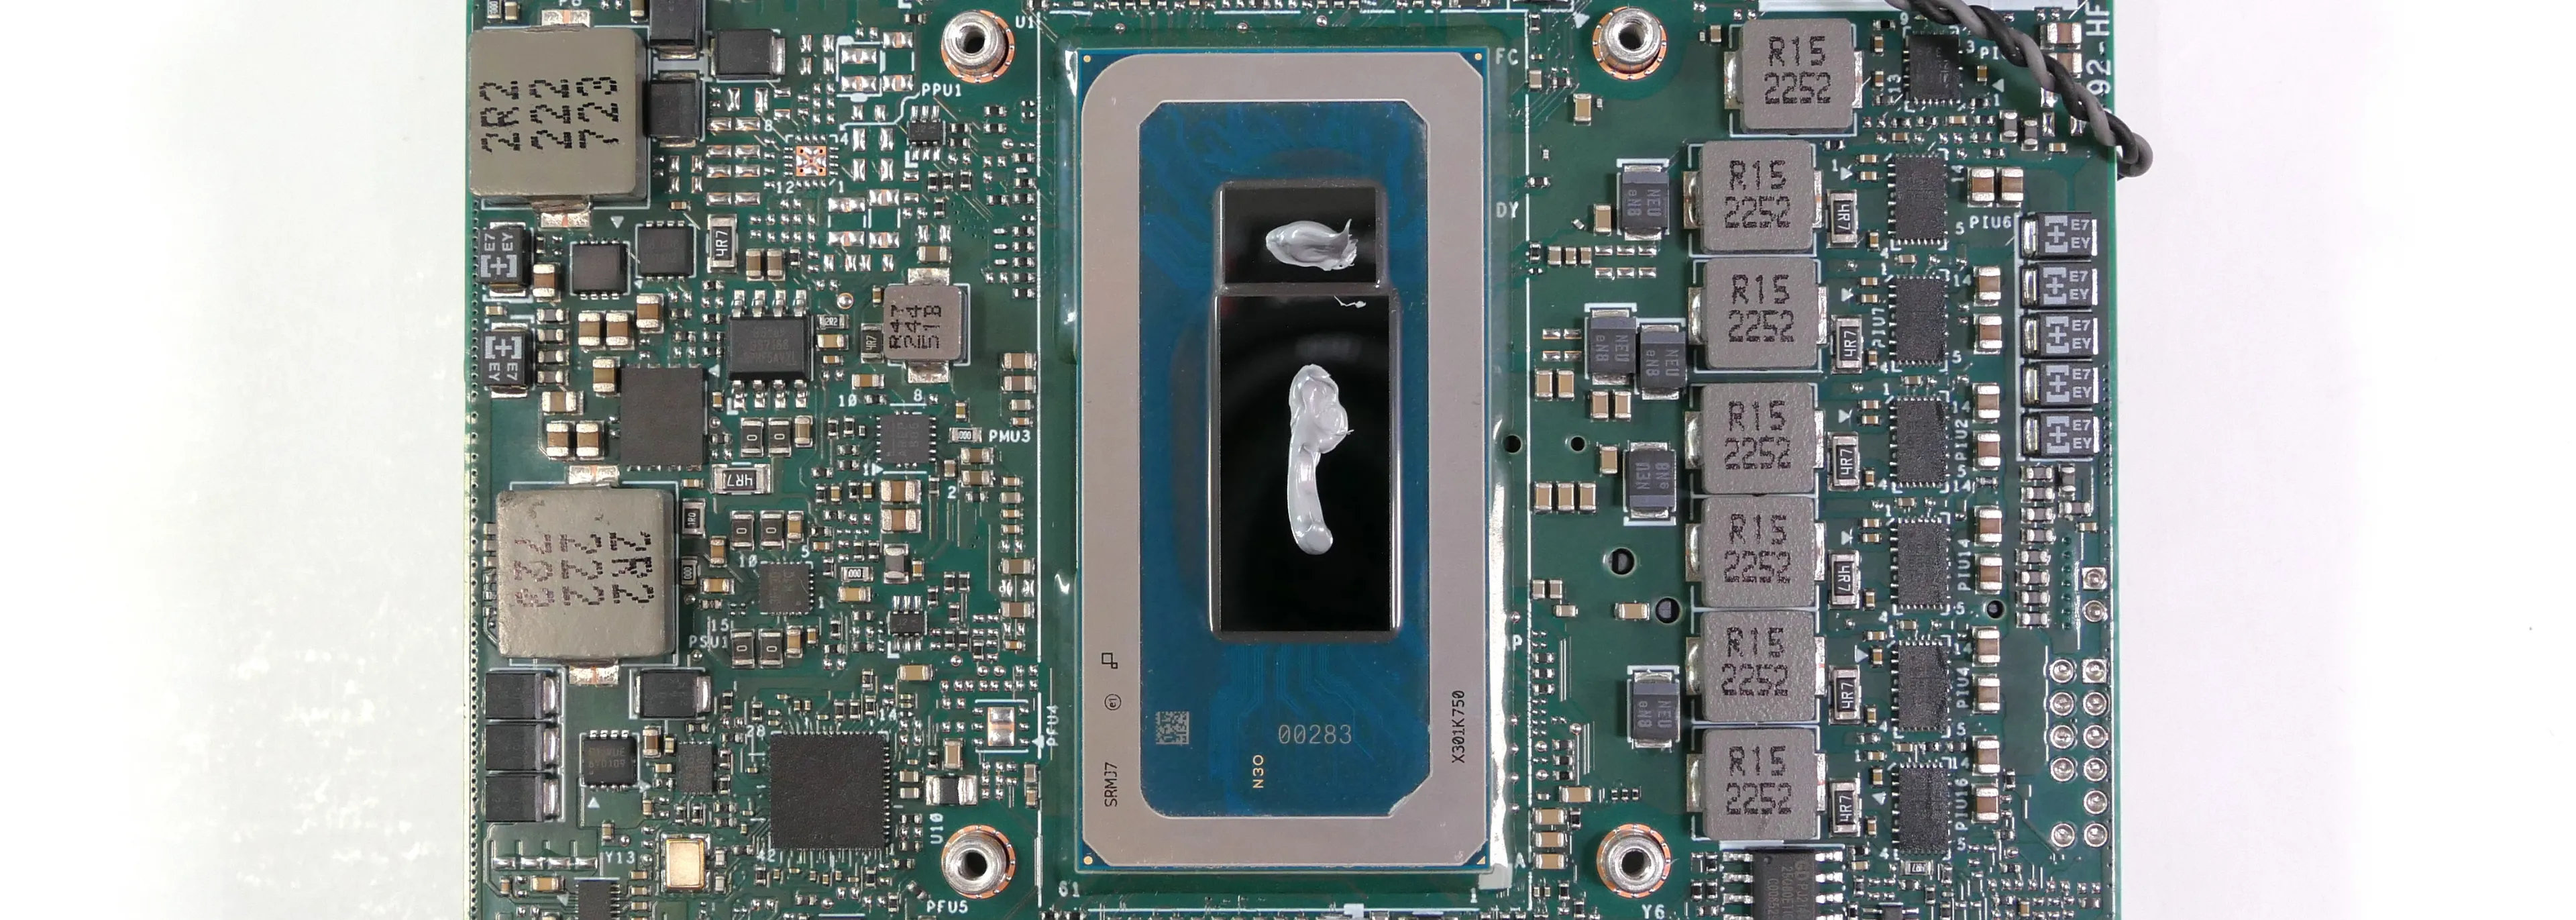 Thermal paste applied to CPU